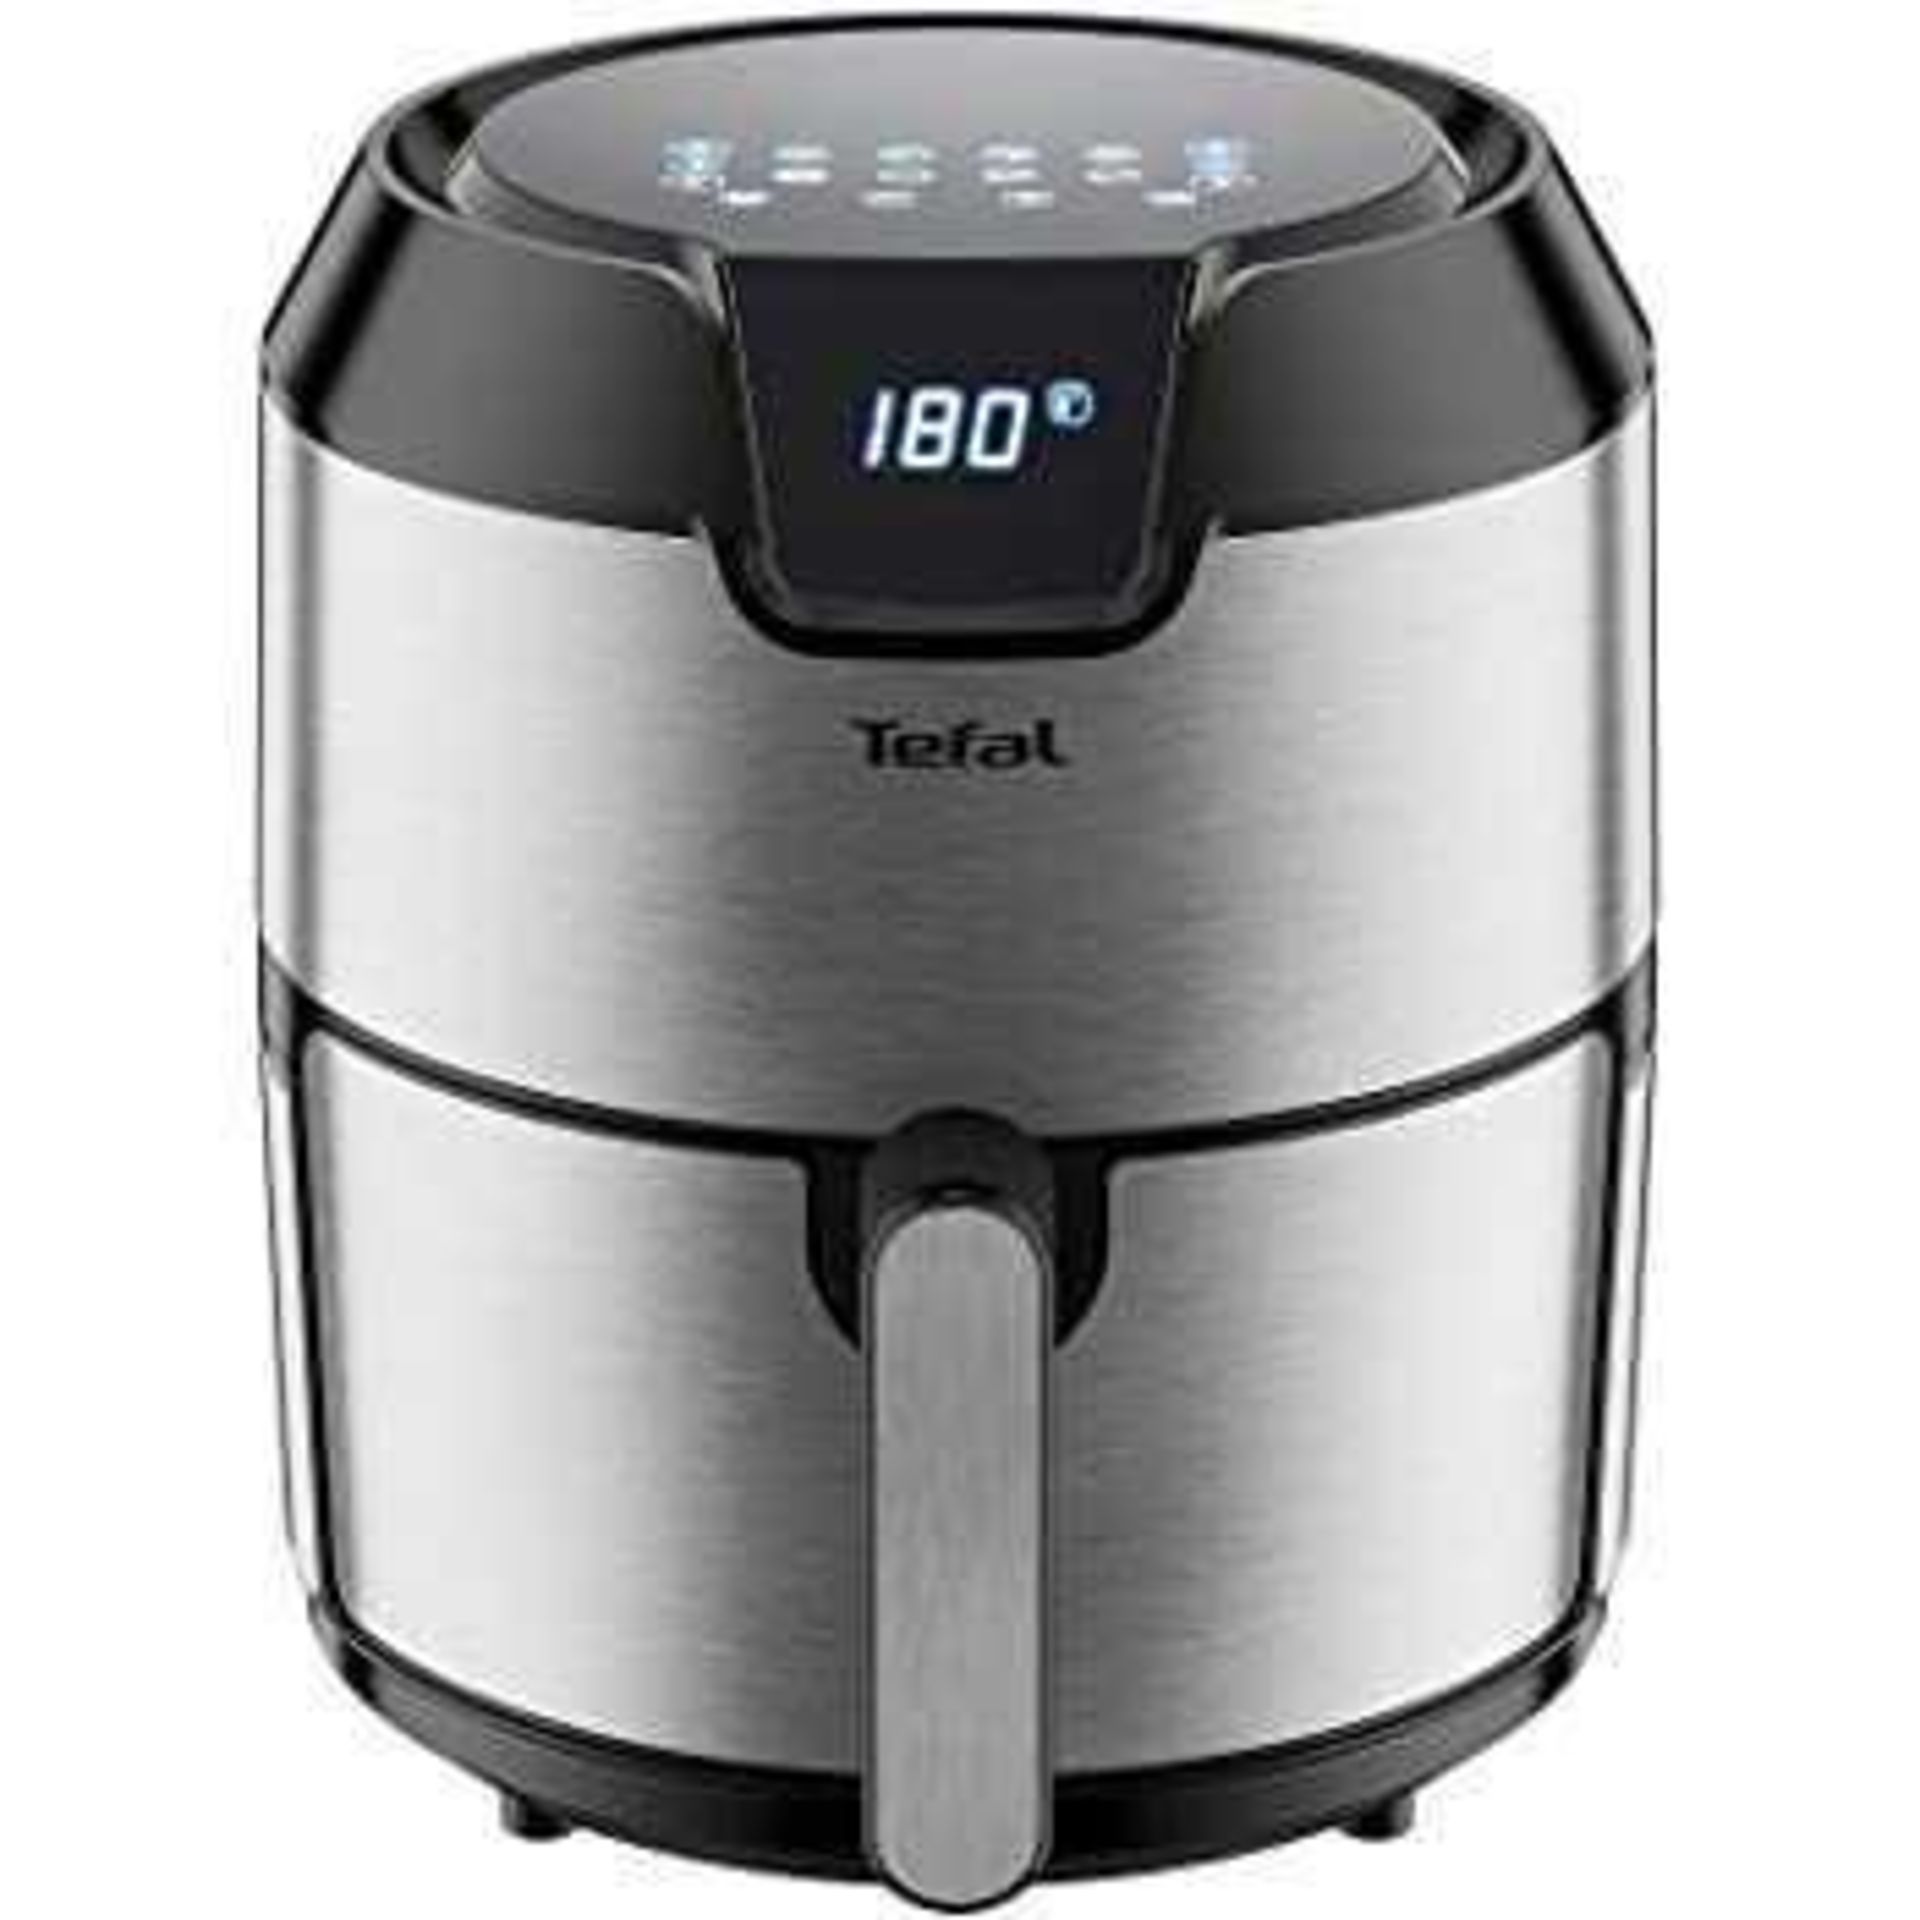 RRP £130 Boxed Tefal Easy Fry 4.2 L Digital Health Fryer In Silver And Black Untested - Image 2 of 2